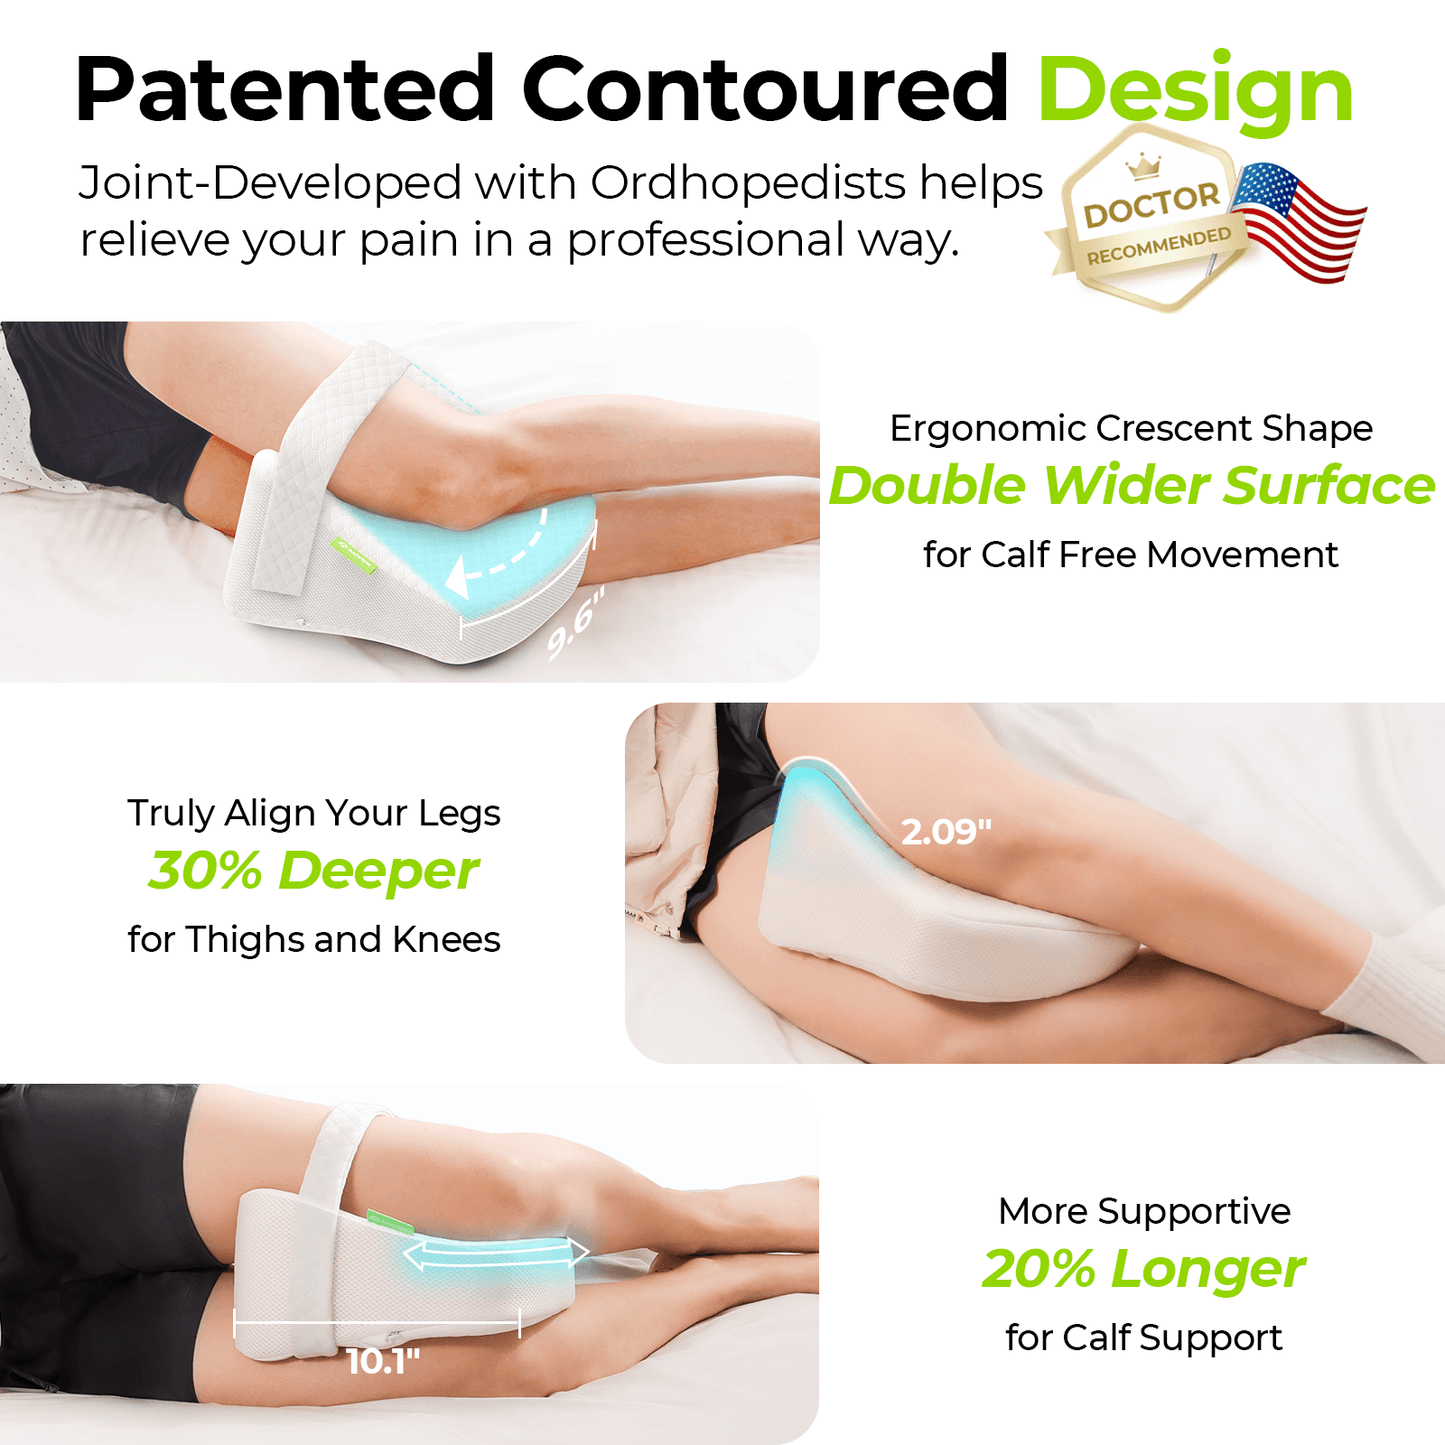 AUVON Contoured Knee Pillow Joint-developed with Orthopedists (2